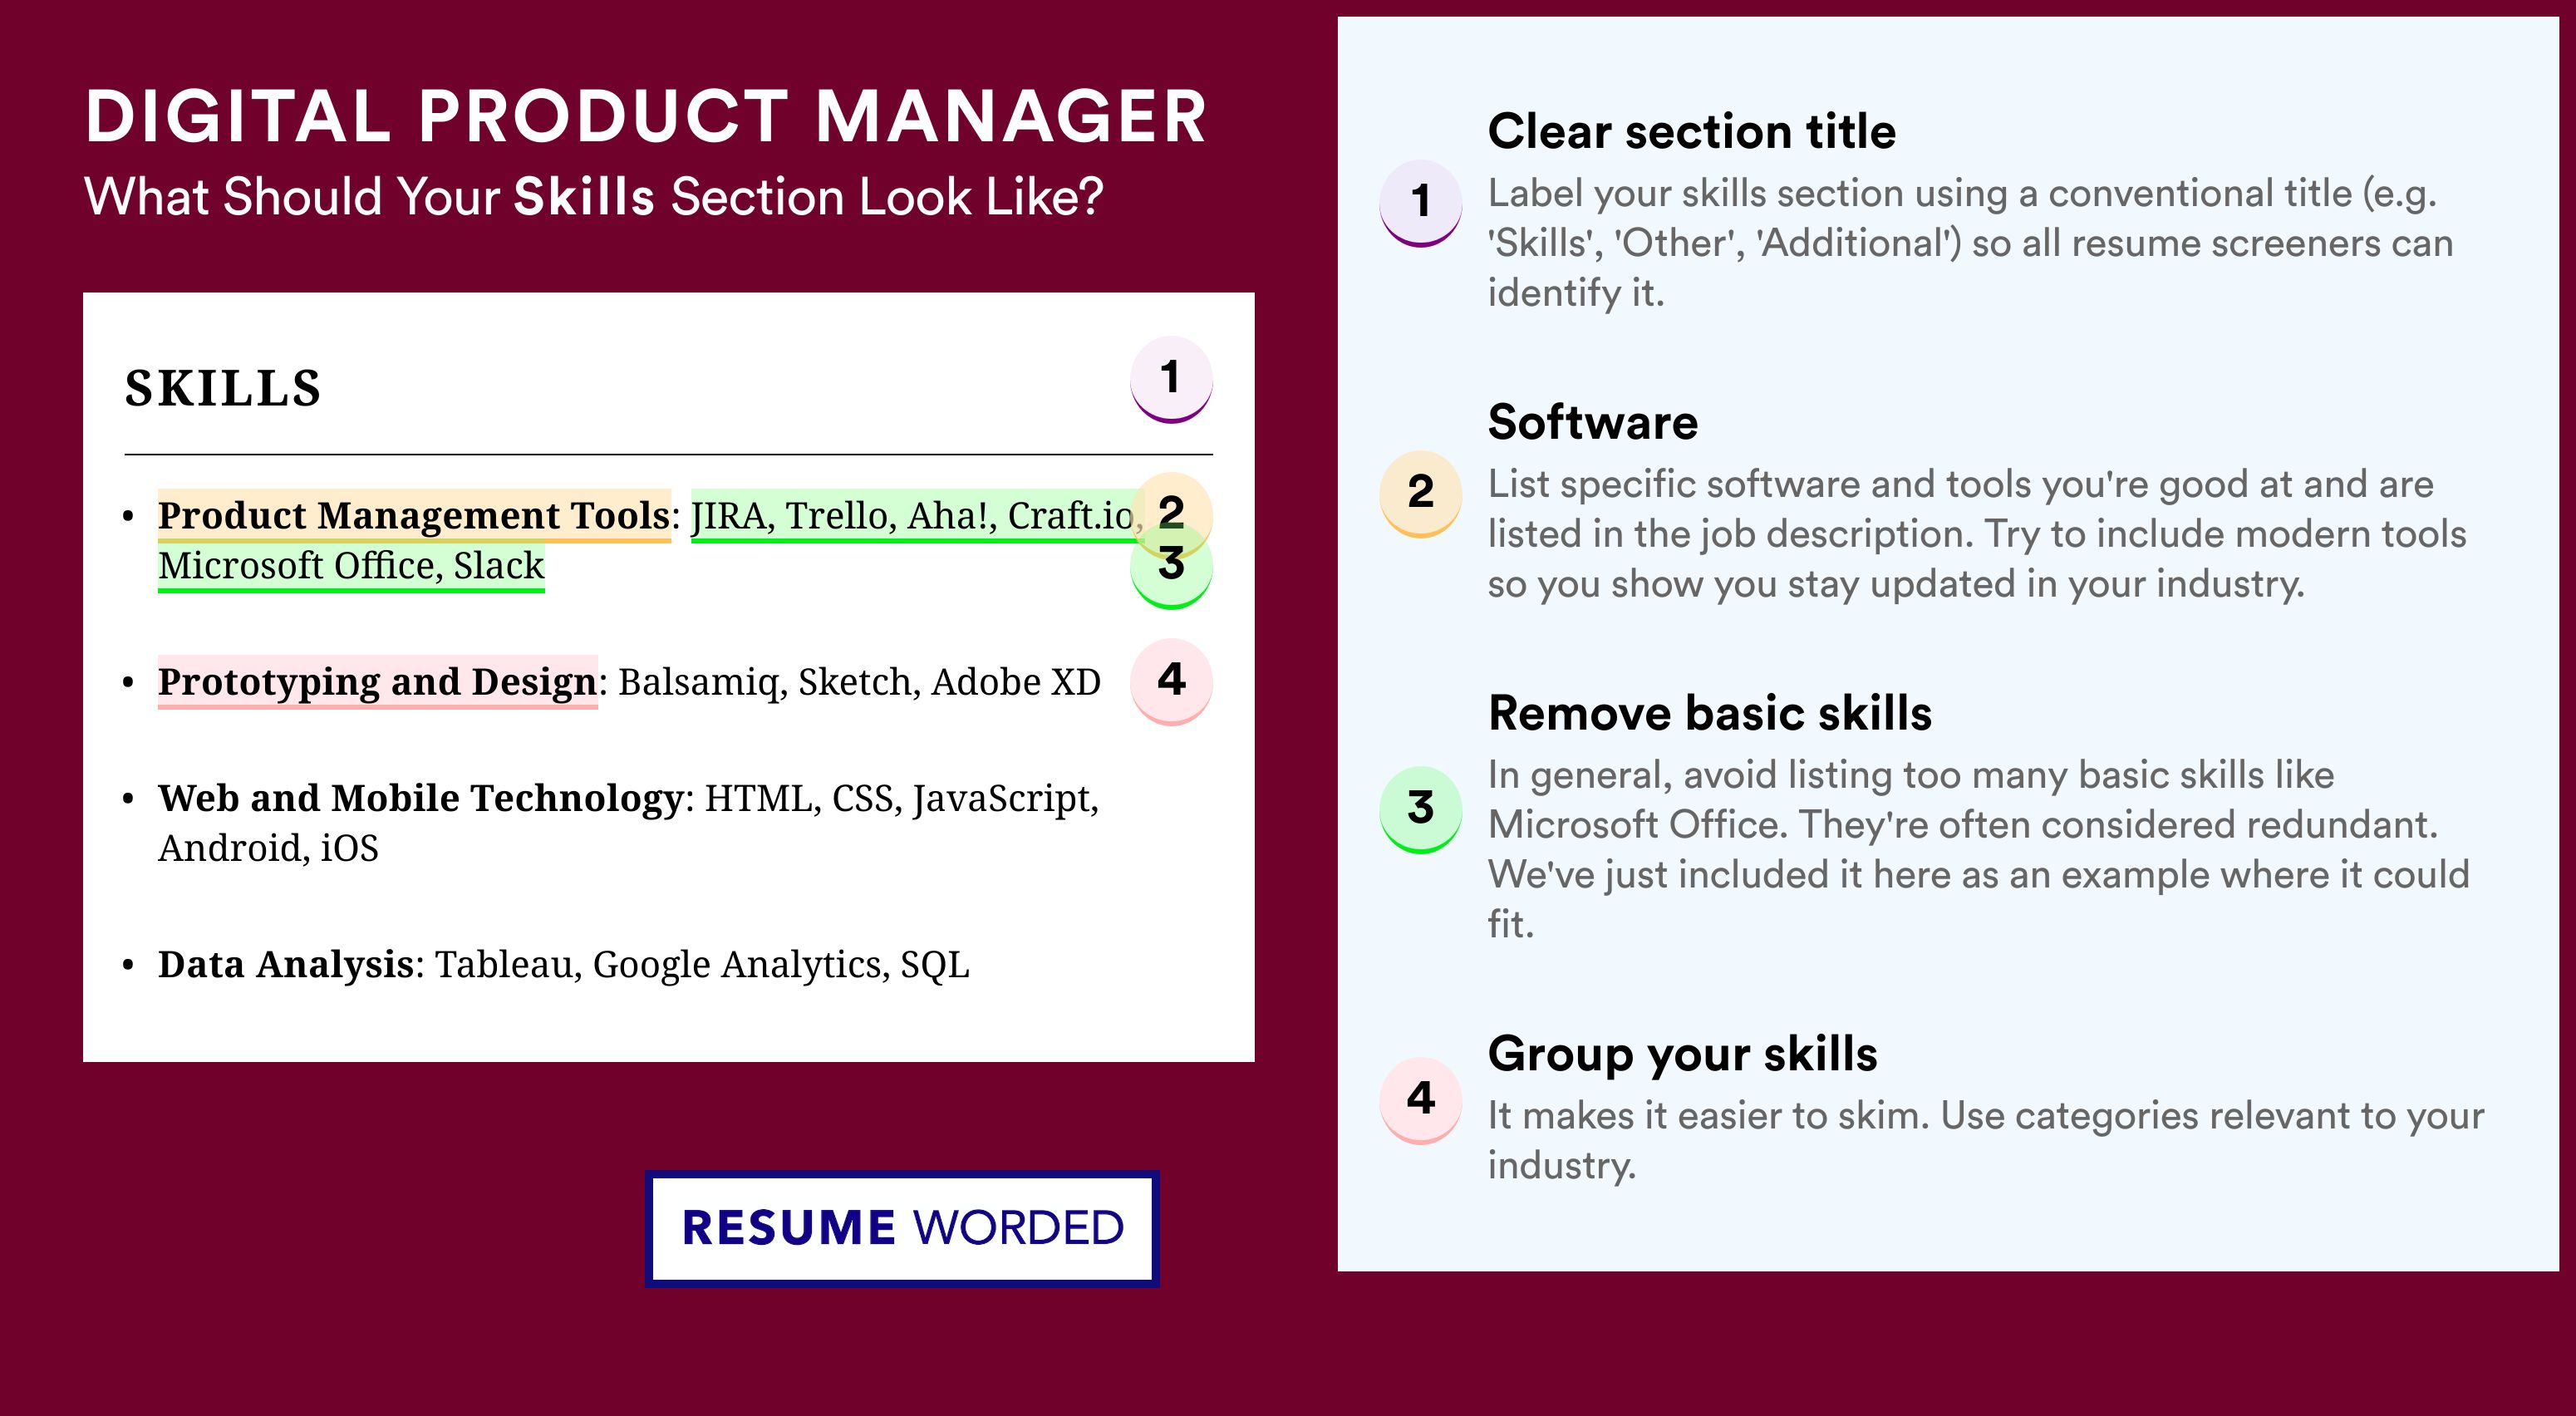 How To Write Your Skills Section - Digital Product Manager Roles